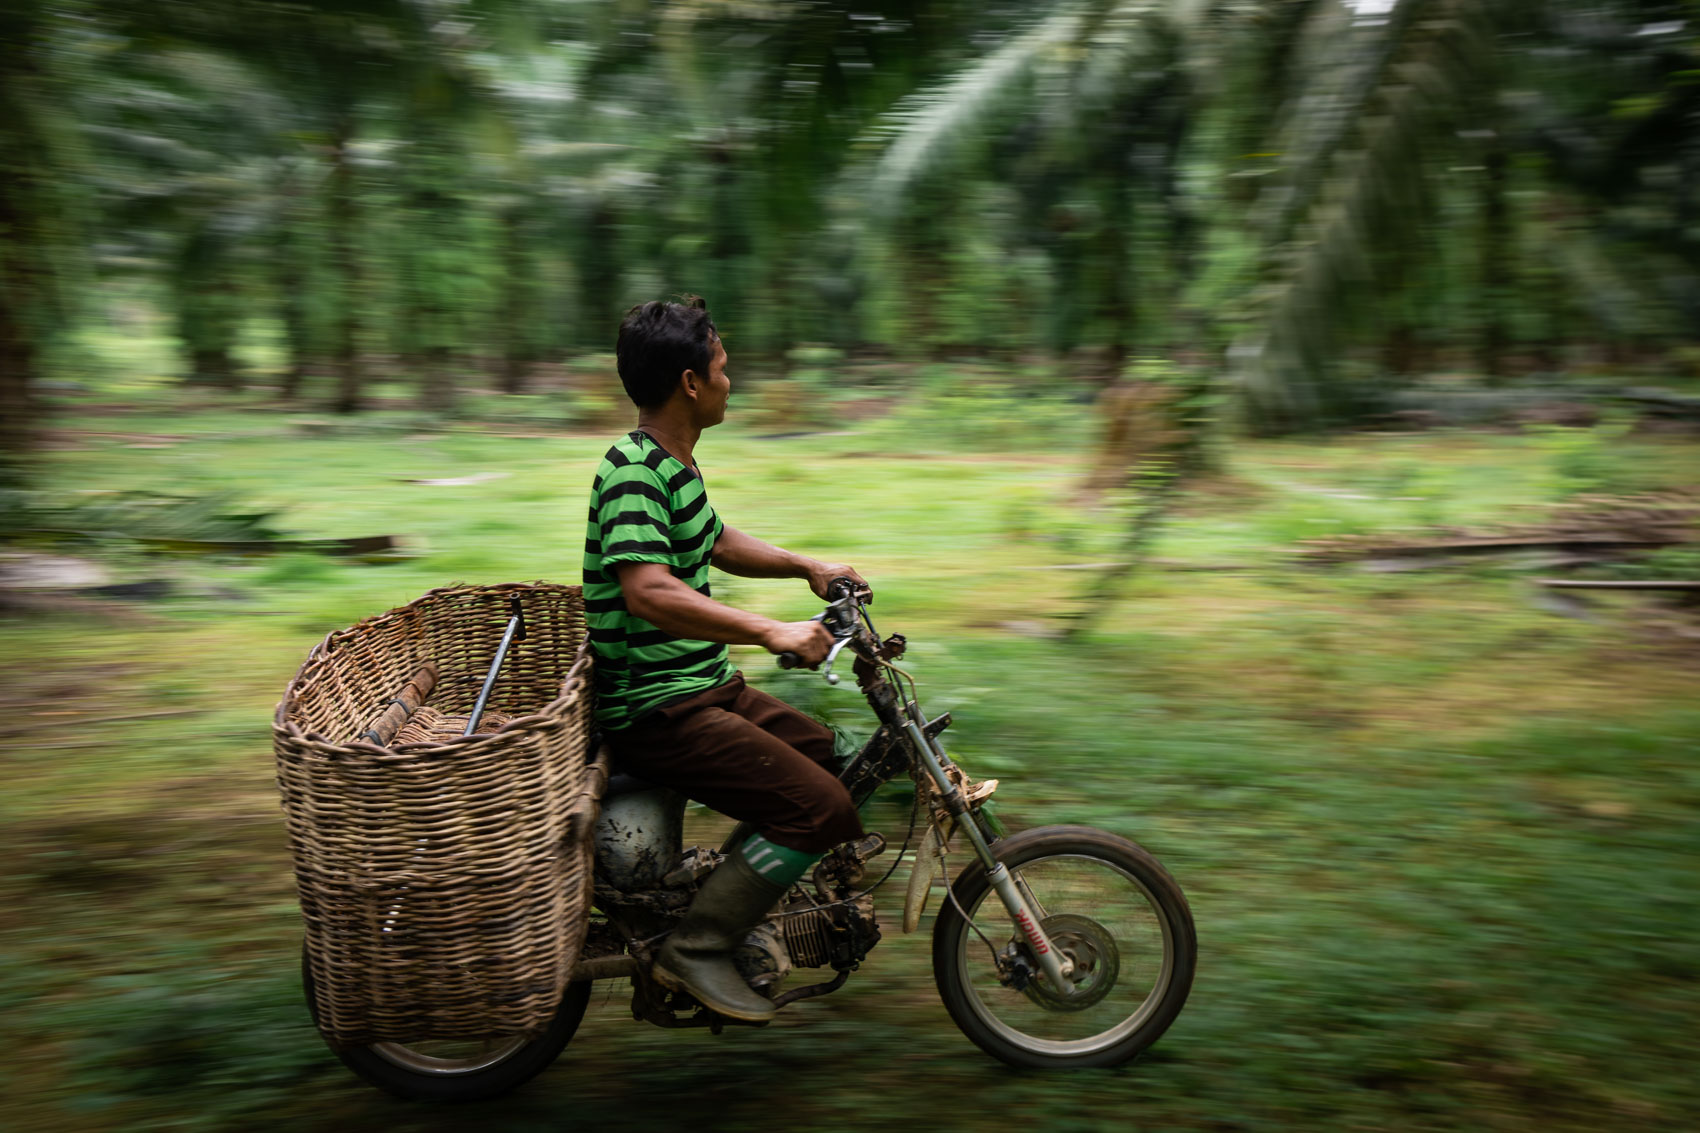 A palm oil worker rides a motorbike through a palm oil plantation in Northern Sumatra, Indonesia